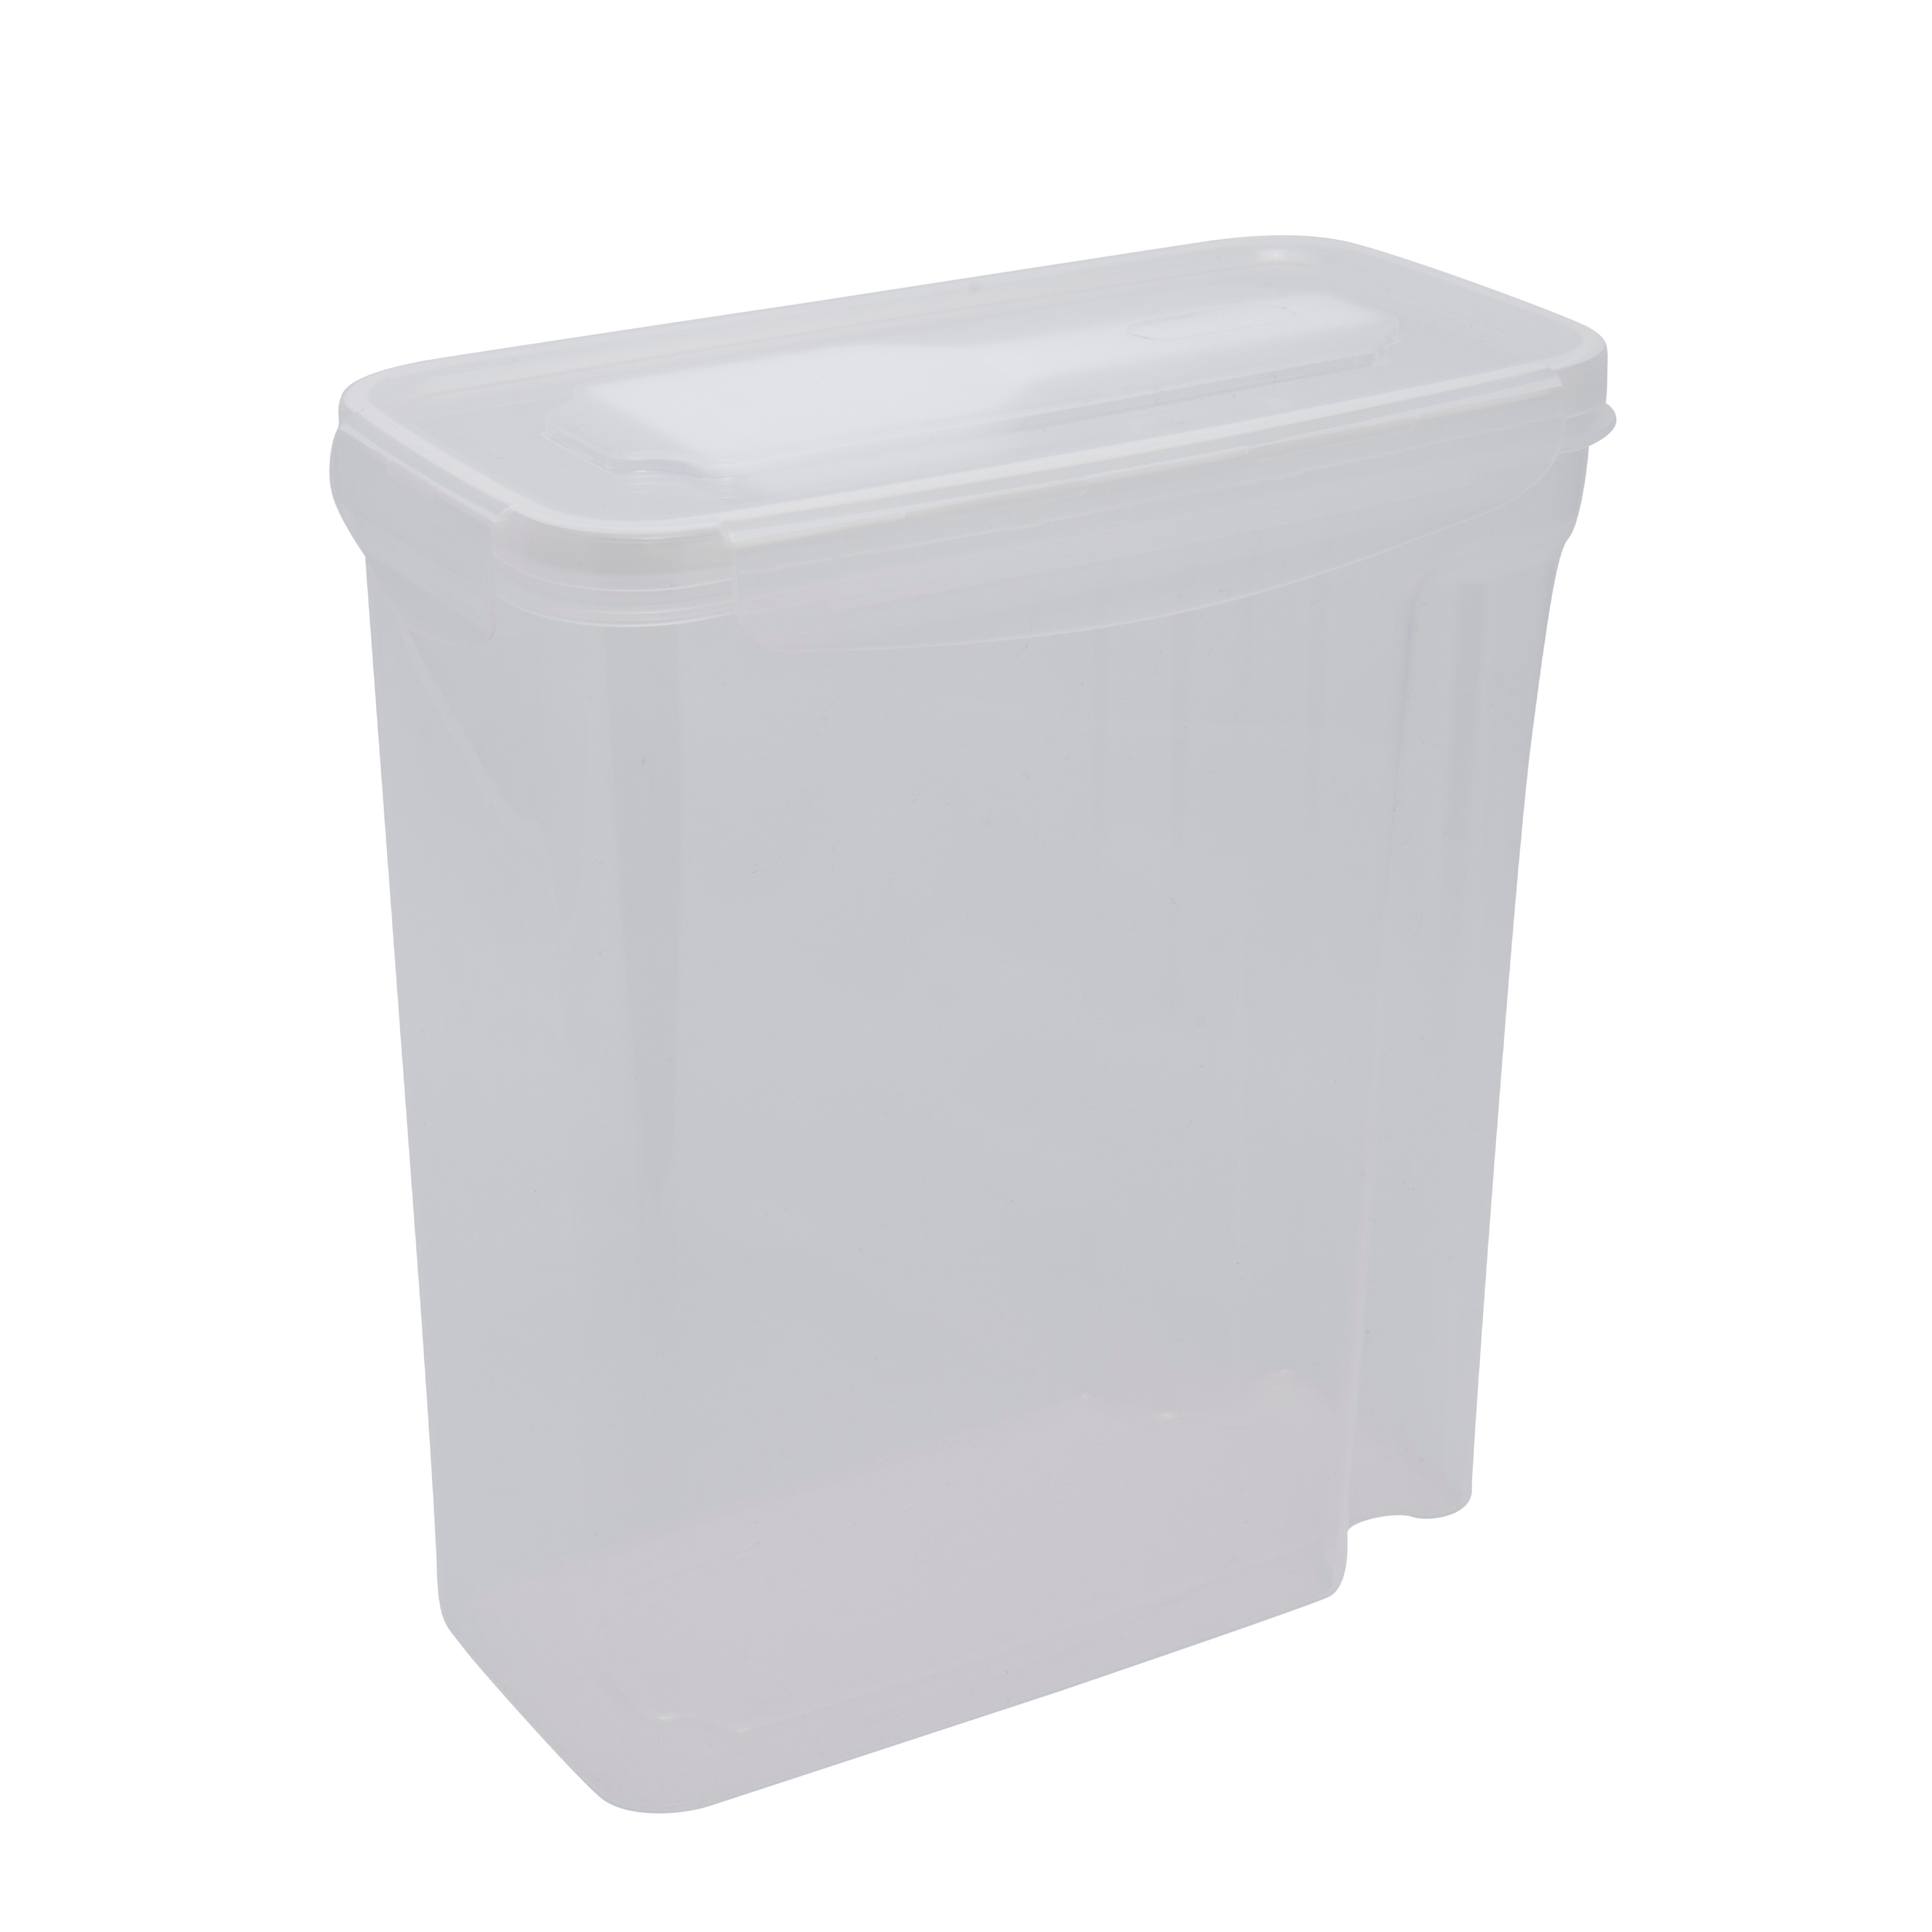 Basicwise White Large Plastic Storage Food Holder Containers with